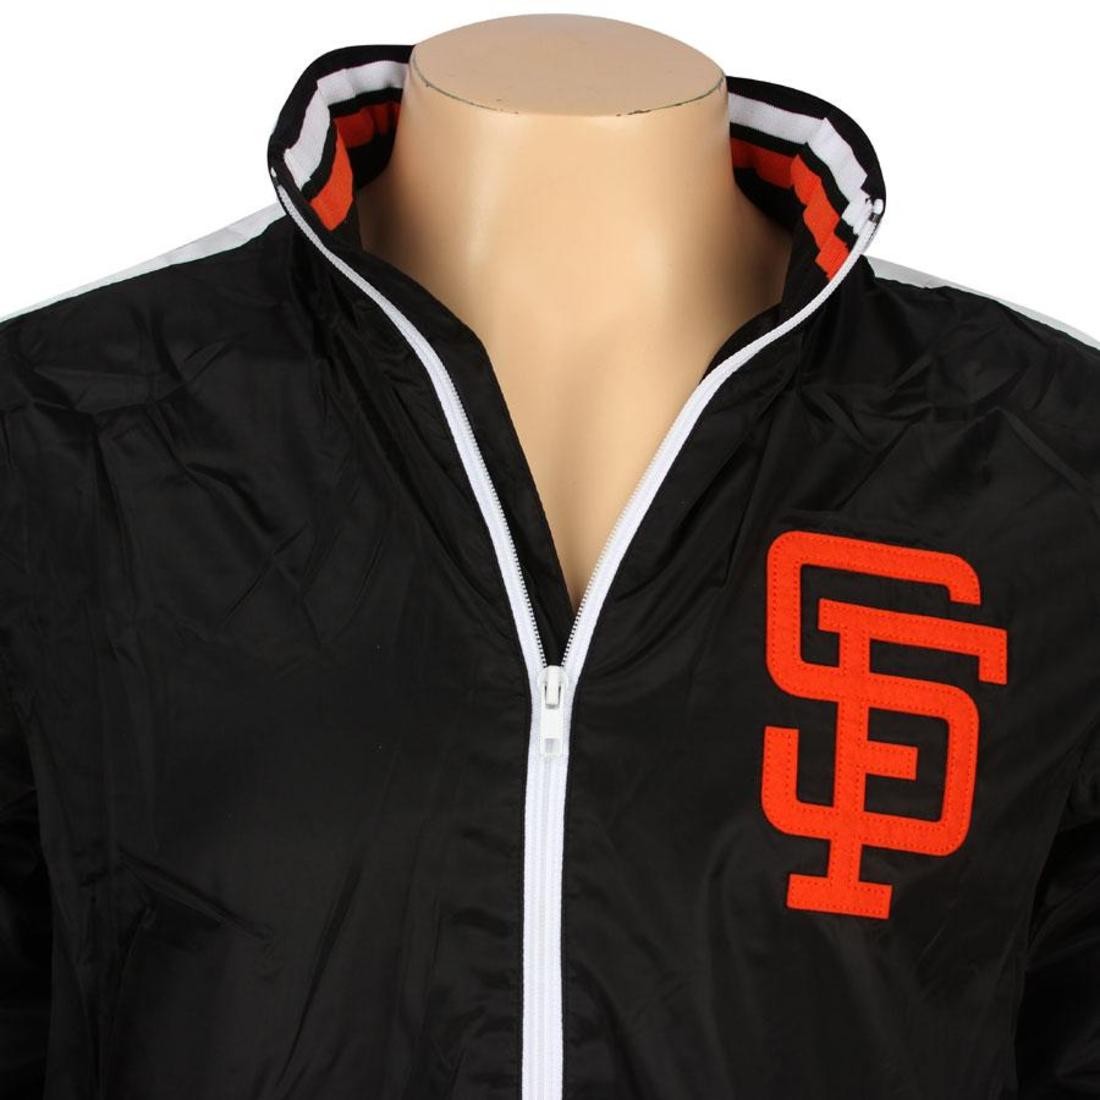 mitchell and ness san francisco giants jacket